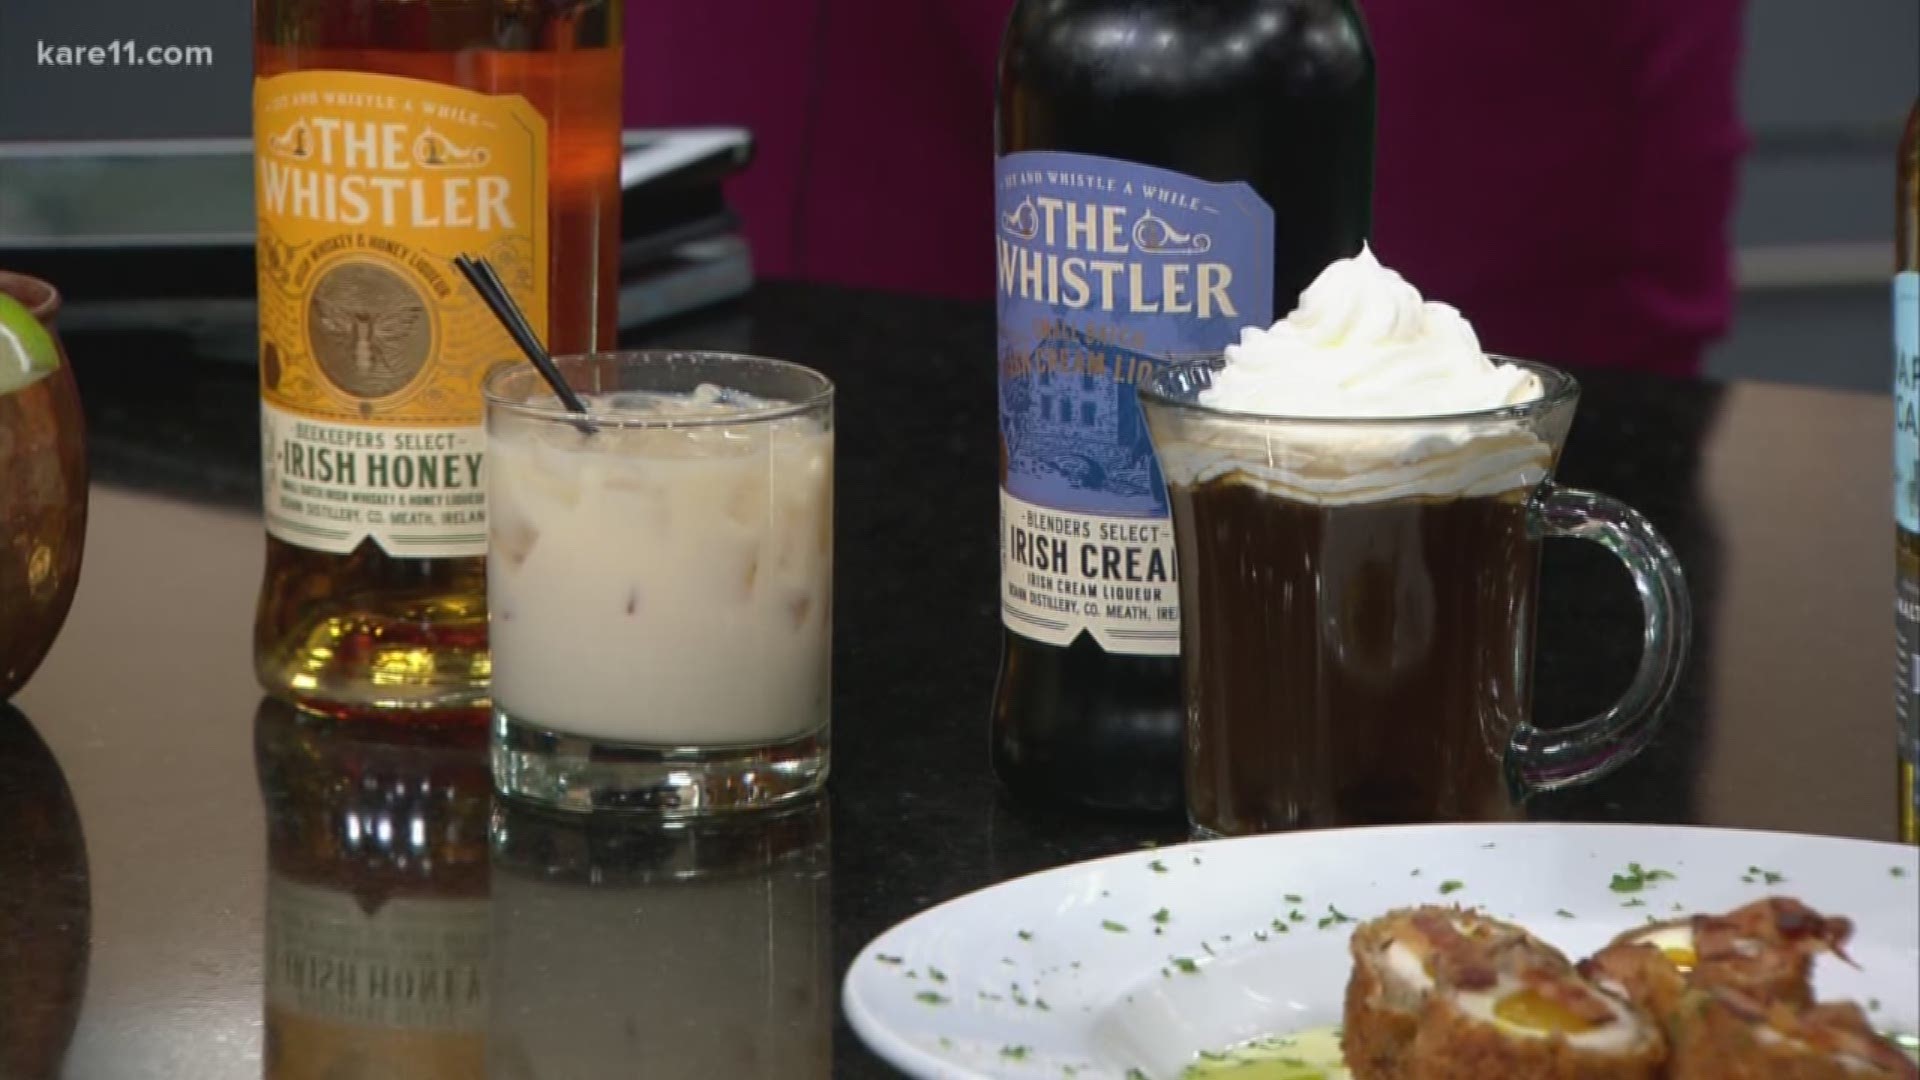 Sydney Mahoney and Peter Kenefick from Emmett’s Public House on Grand joined us on KARE 11 News at 4 to get us into the St. Patrick's Day spirit.